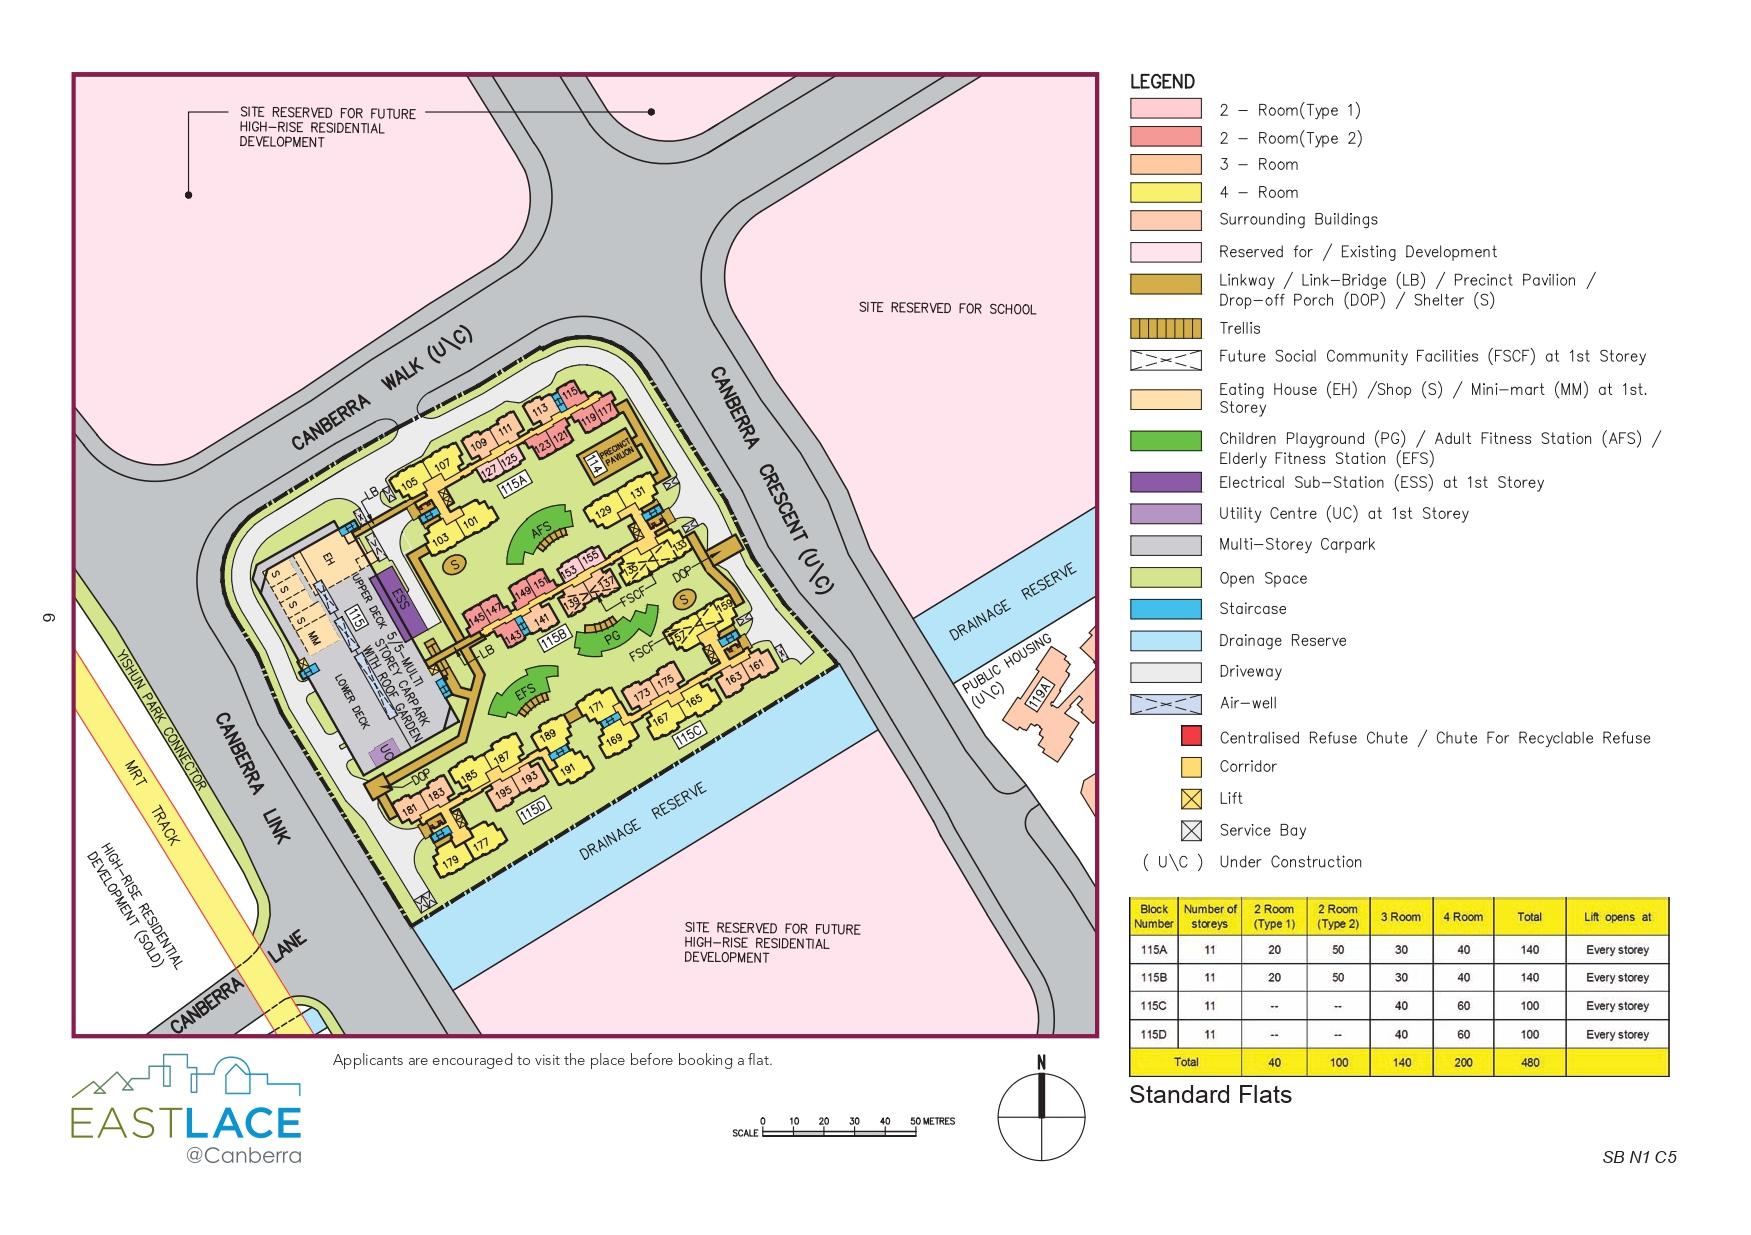 EastLace @ Canberra site-plan